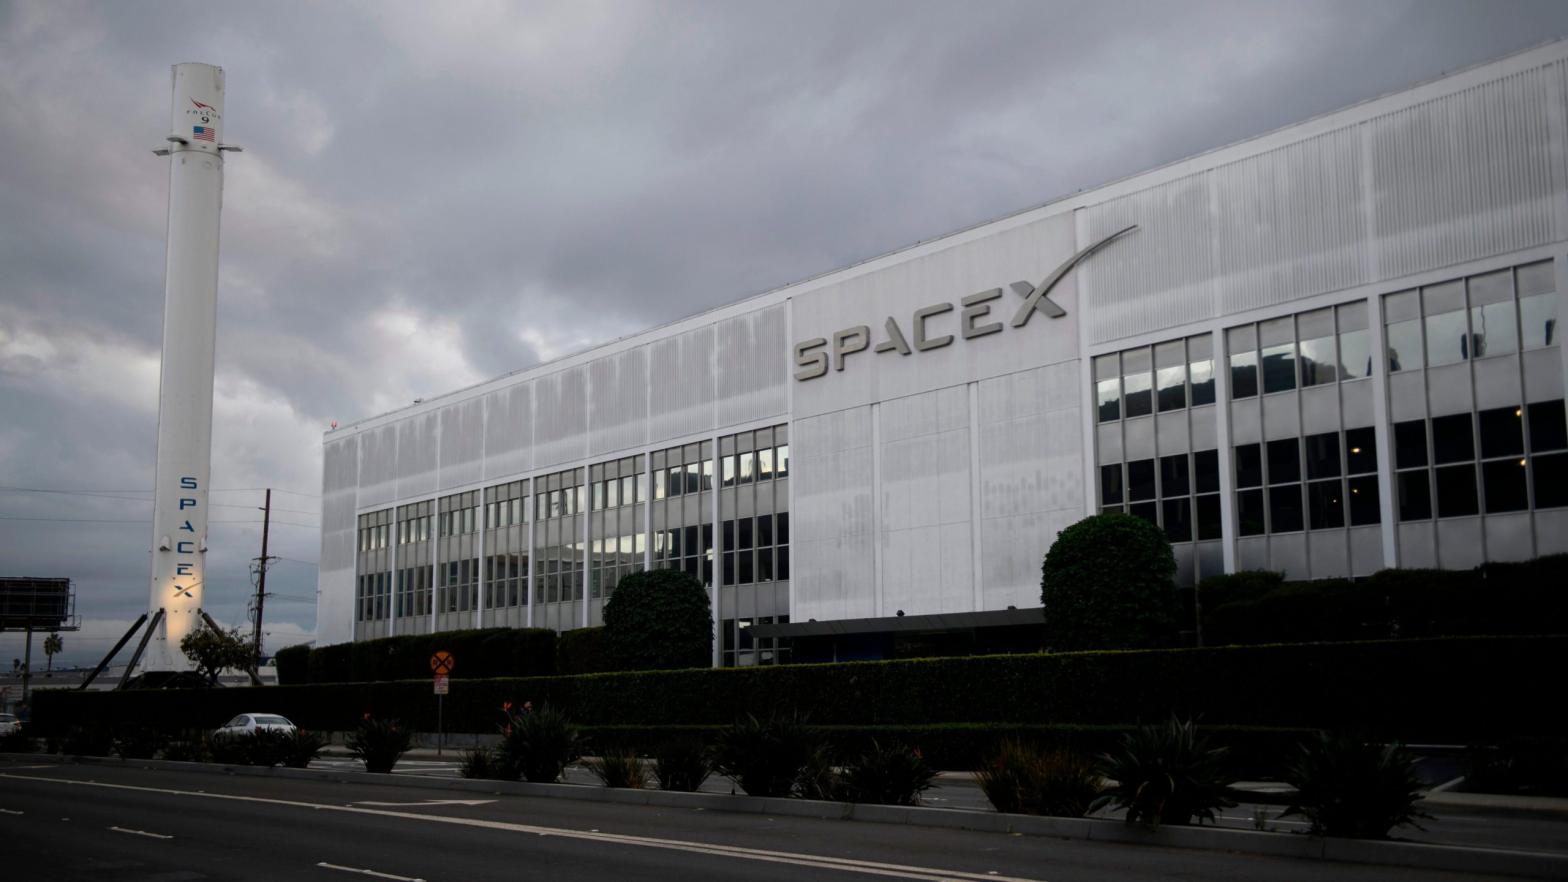 A Falcon 9 rocket is displayed outside the SpaceX headquarters on January 28, 2021 in Hawthorne, California.  (Photo: Patrick T. Fallon, Getty Images)